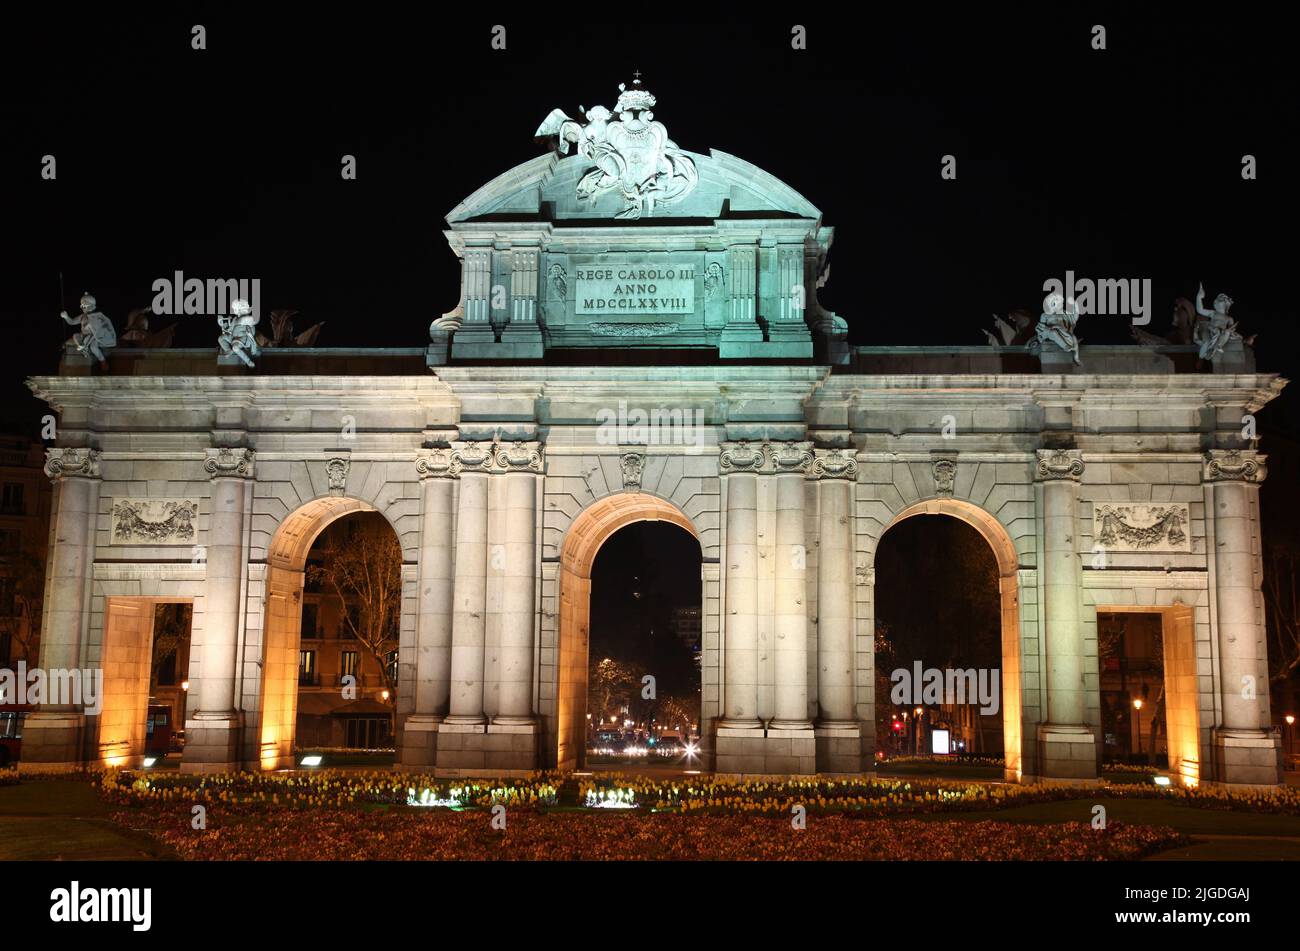 Night view of the Puerta de Alcalá (Alcala Gate) in the Plaza de la Independencia (Independence Square) in Madrid, Spain Stock Photo